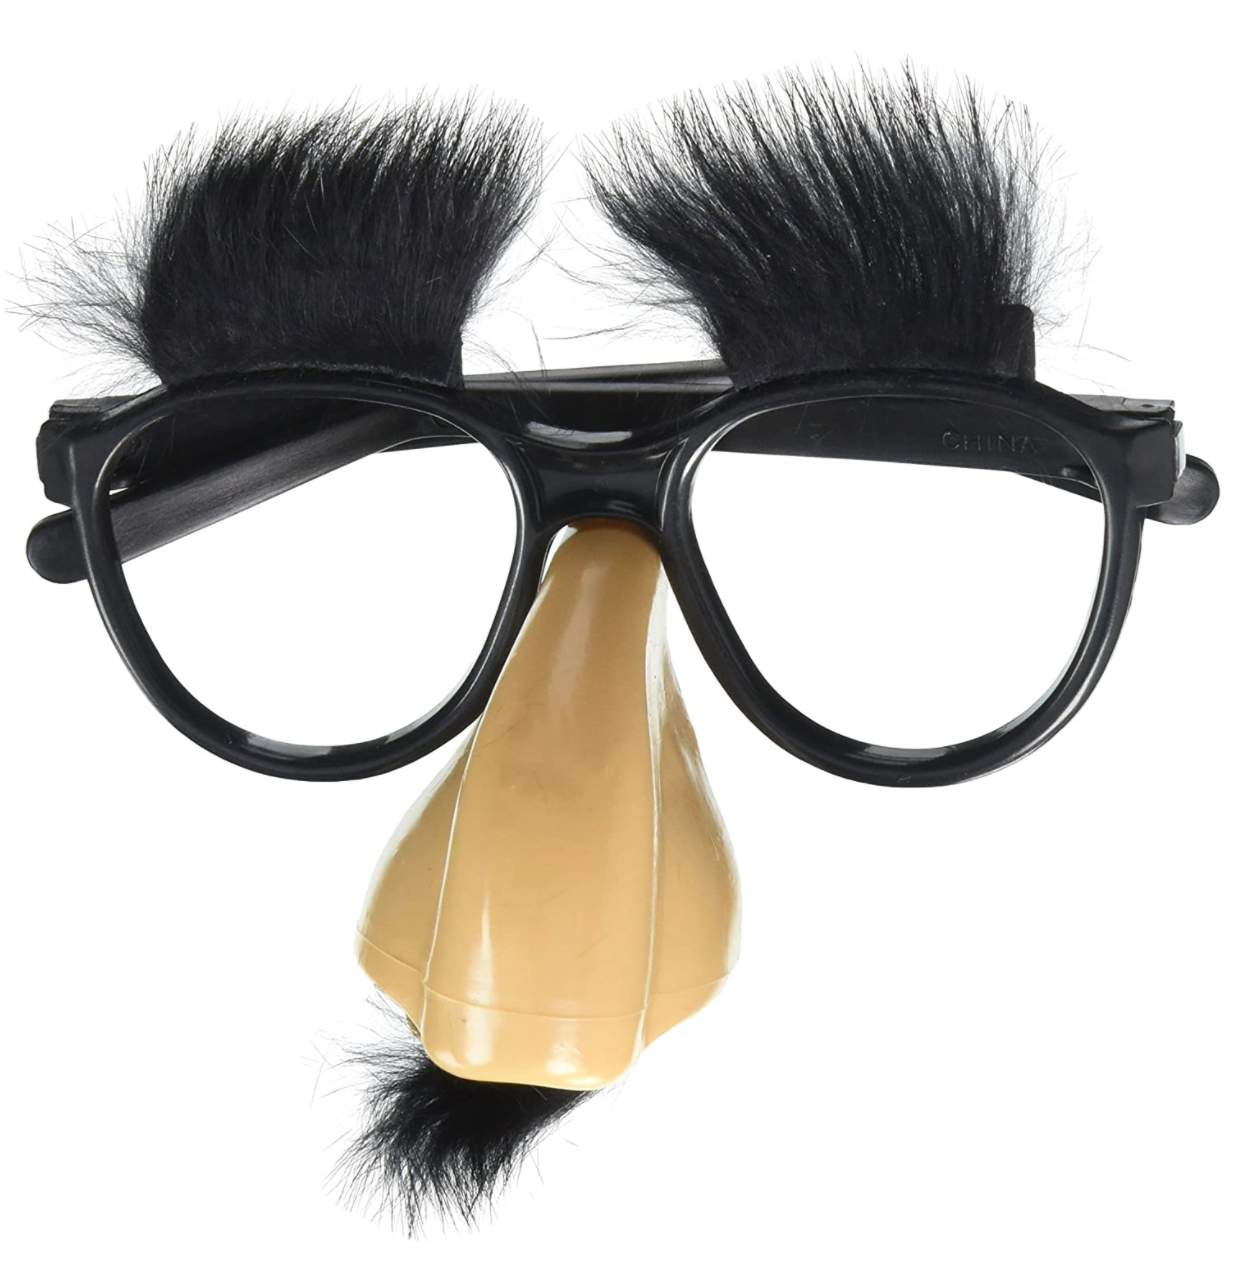 Accoutrements Fuzzy Nose And Glasses Classic Disguise